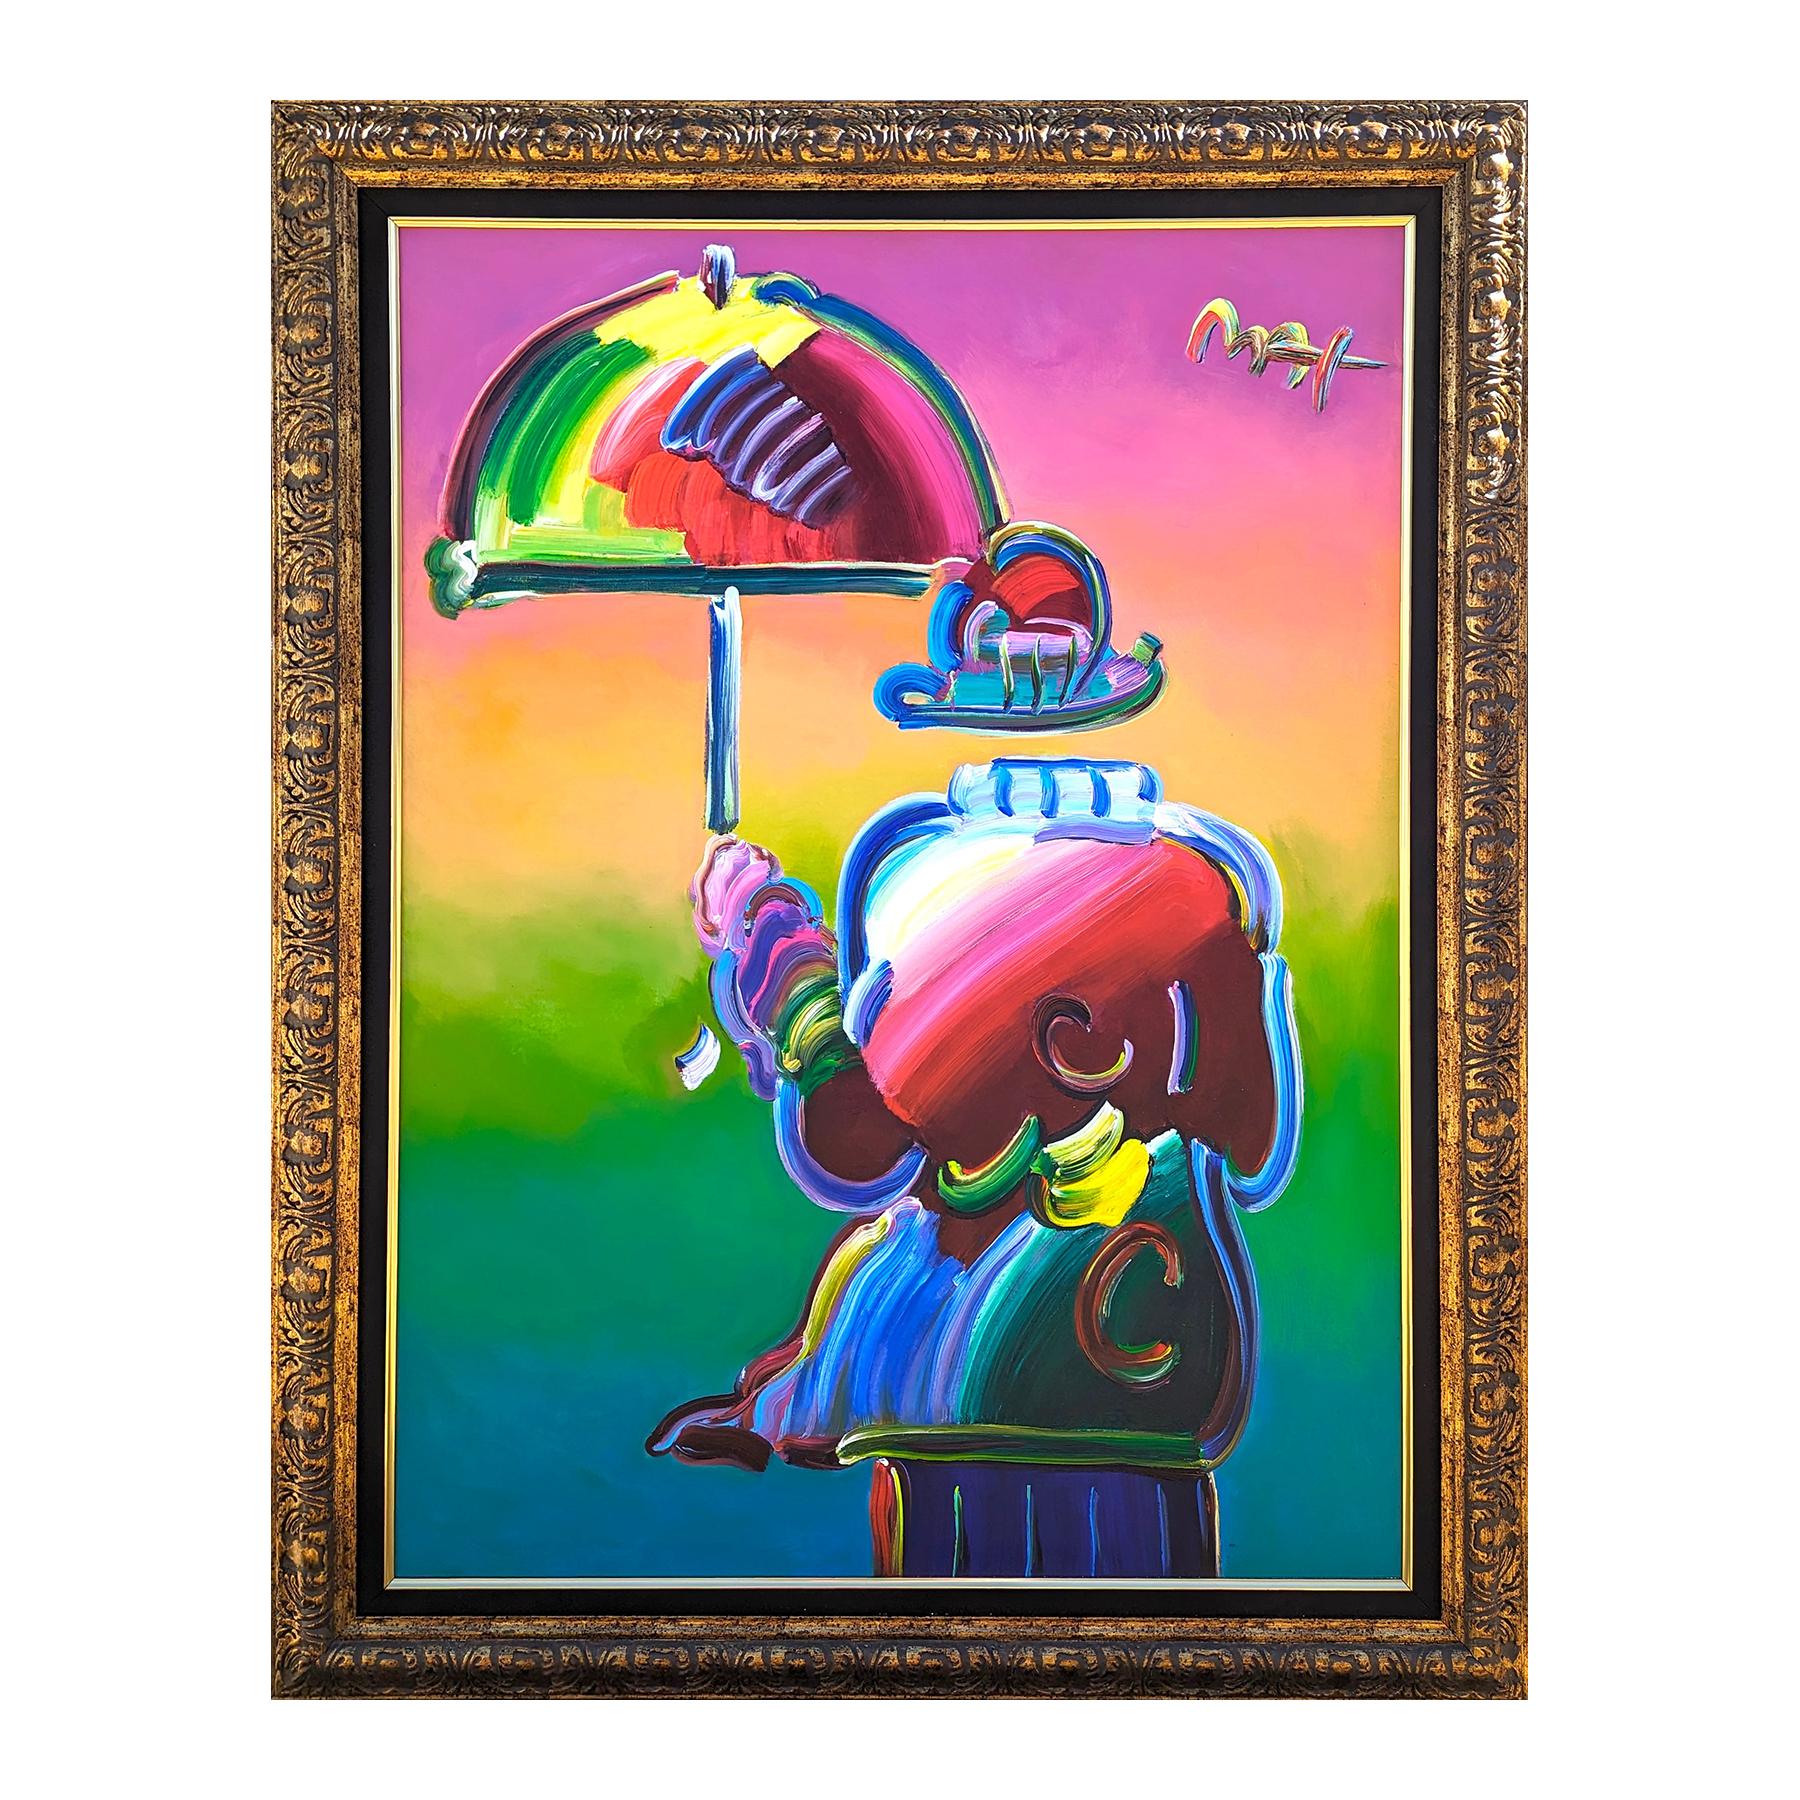 Bright, colorful abstract painting by German-American artist Peter Max. The work features a man holding an umbrella with a floating bowler hat. Signed in the front upper right corner. Additional certification included on the reverse. Currently hung